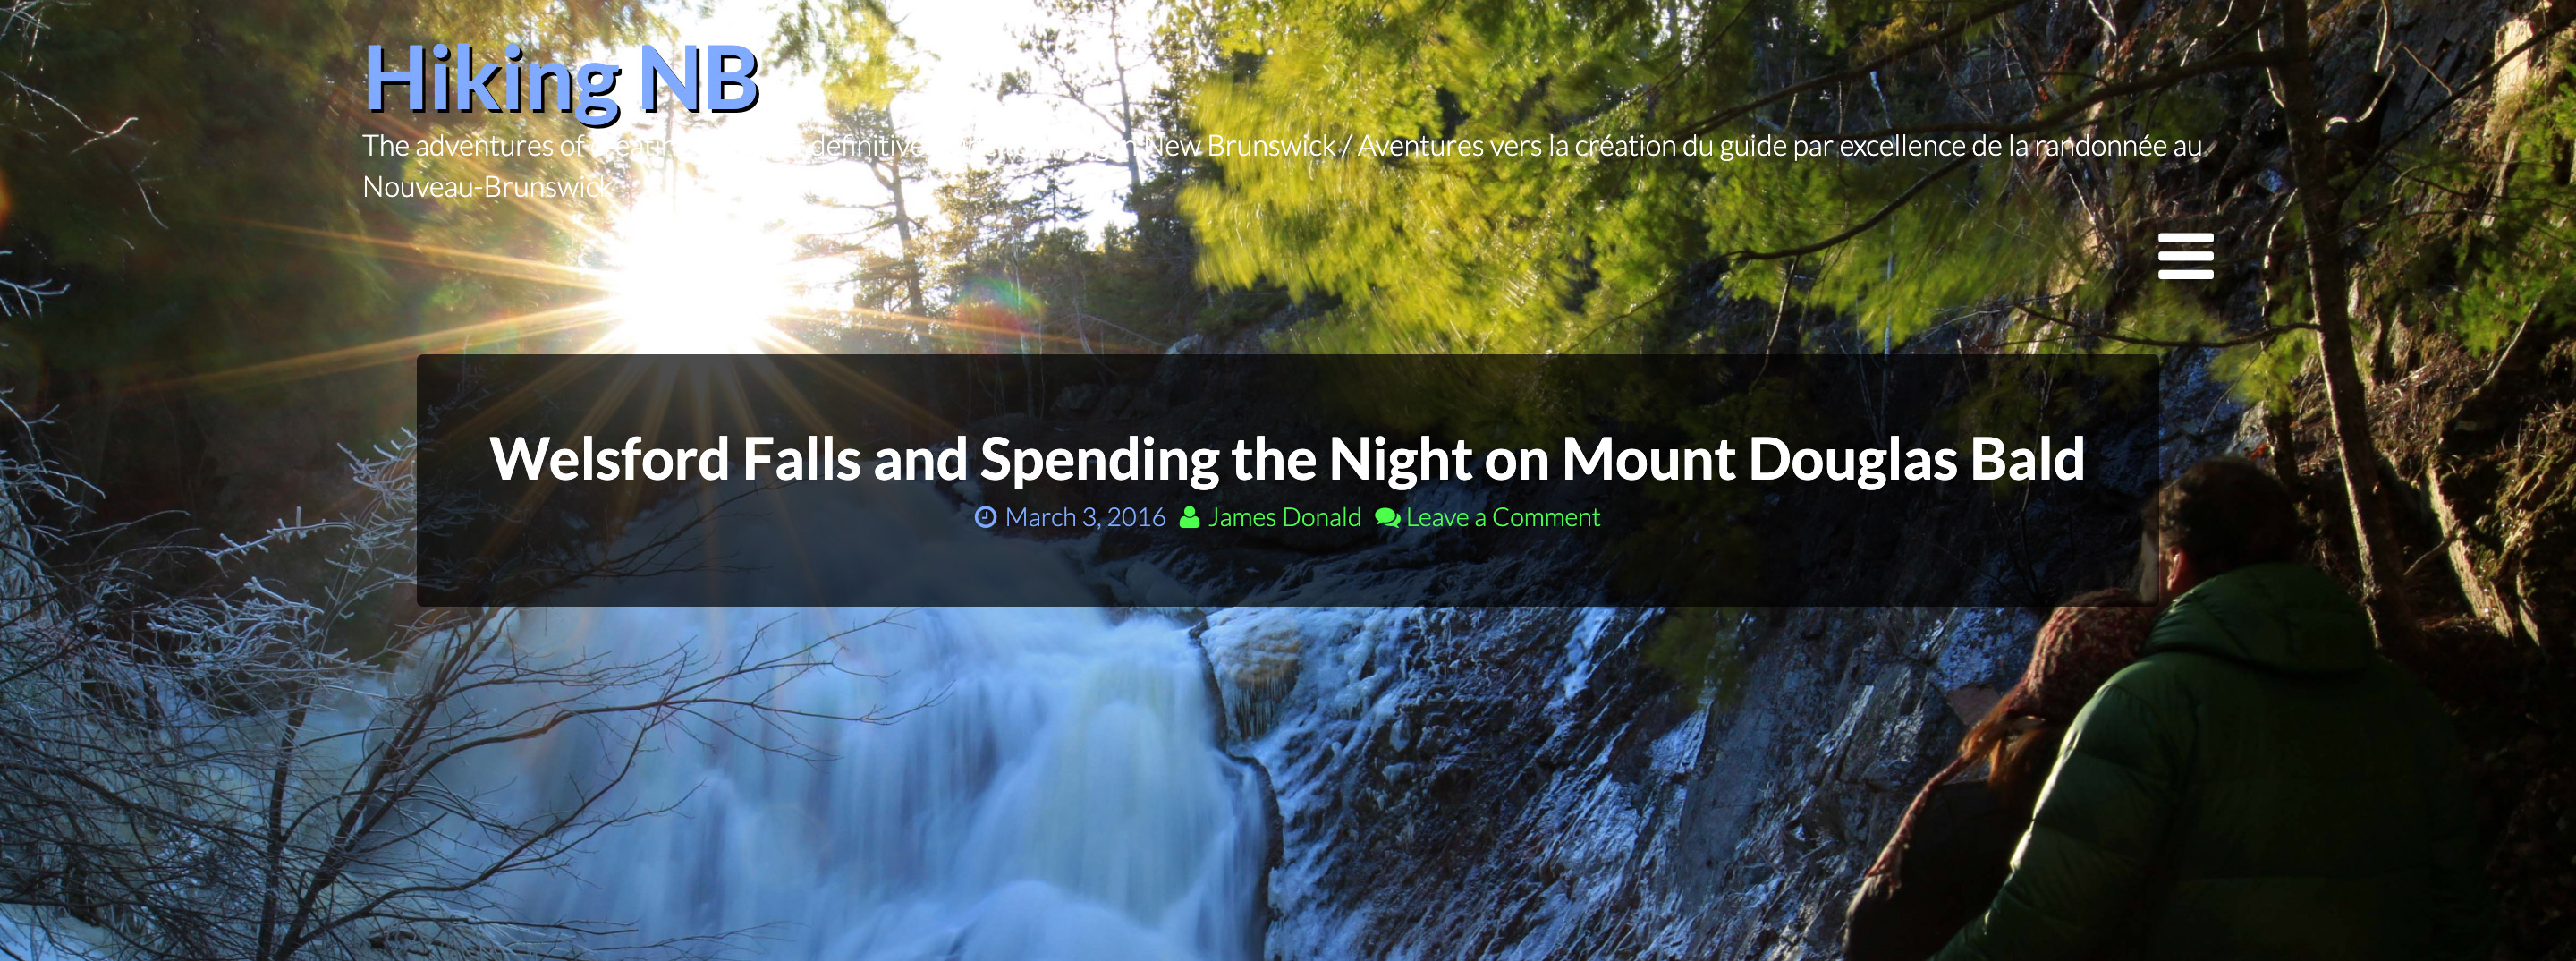 Welsford Falls and Spending the Night on Mount Douglas Bald Blog Post